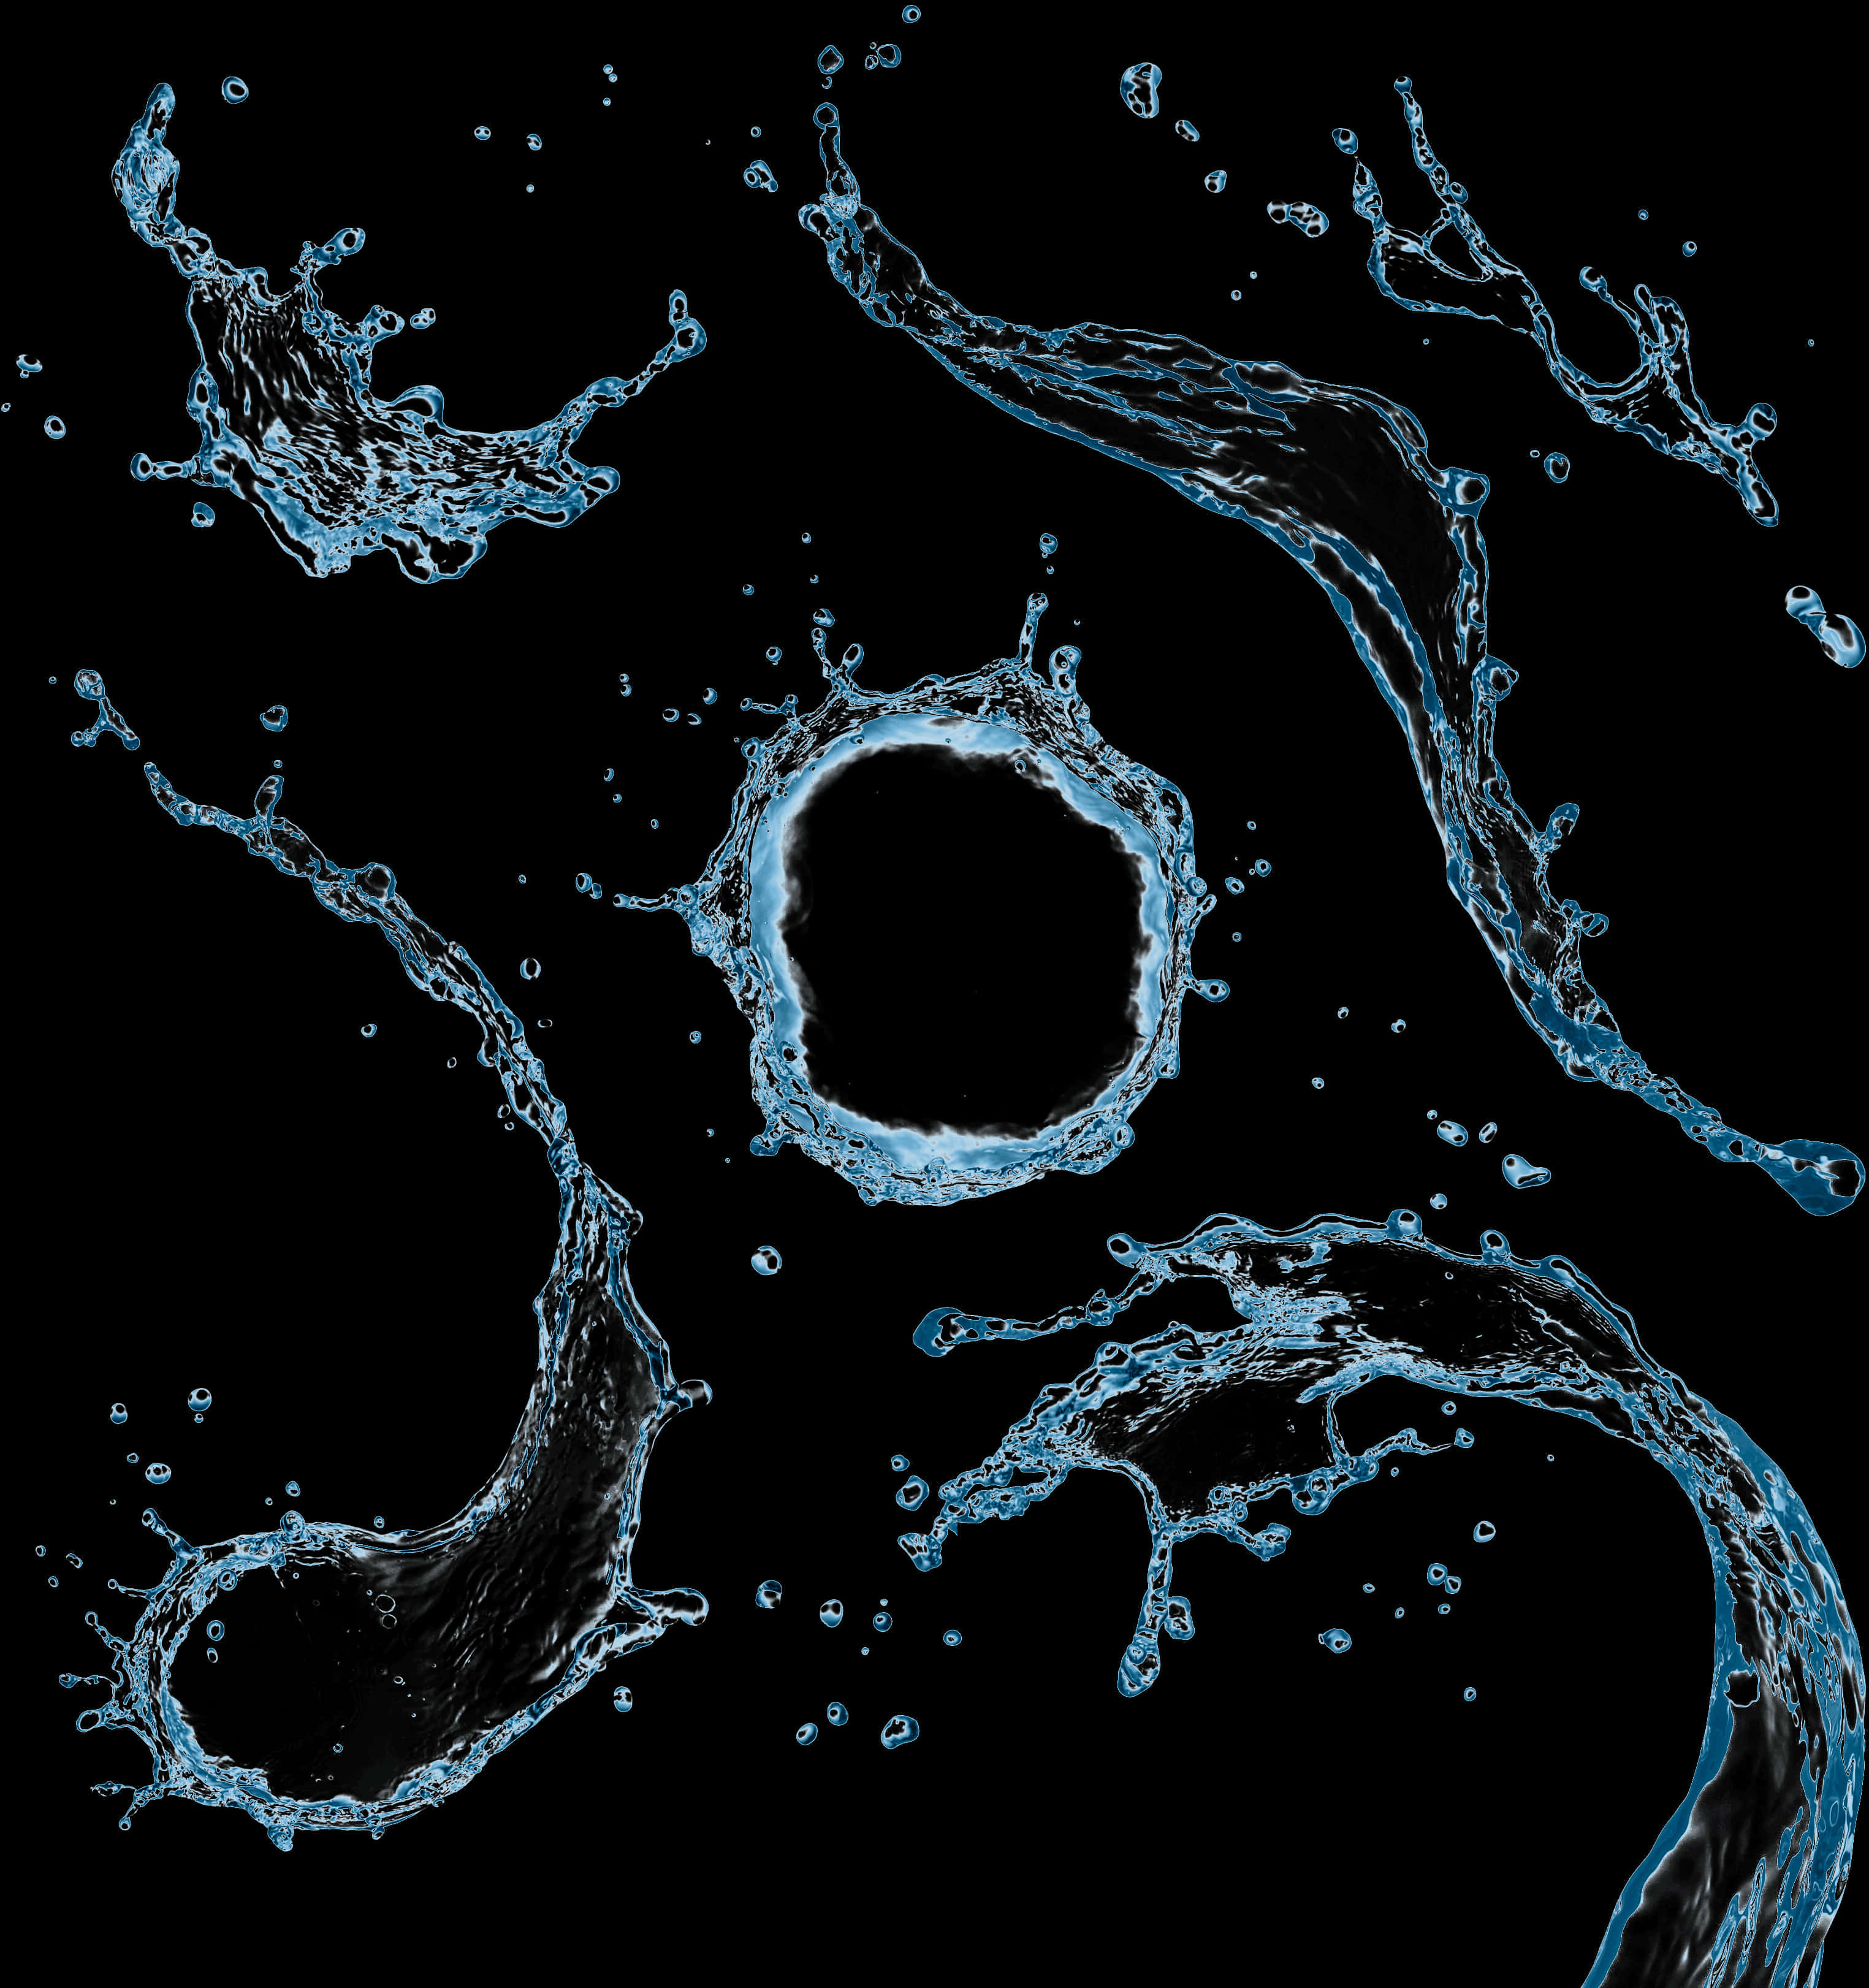 Water Splashes Of Water On A Black Background